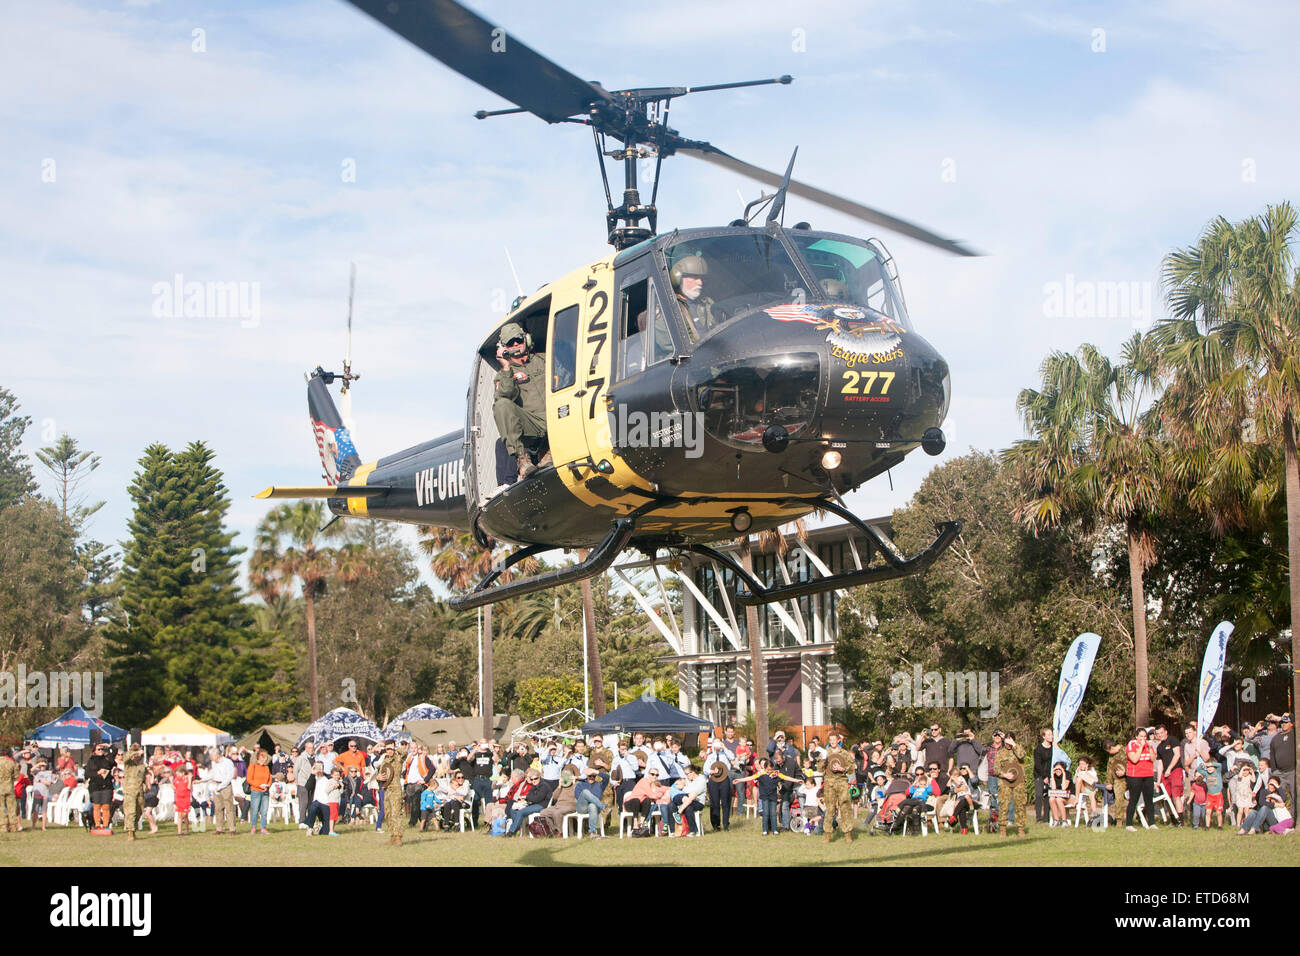 Sydney, Australia. 13th June, 2015. 10th Avalon Beach Military Tattoo featured the Bell UH-1 Iroquois which is a military helicopter powered by a single turboshaft engine, with two-bladed main and tail rotors, the Huey Eagle One Vietnam helicopter seen here drew a large crowd of onlookers,Avalon Beach Sydney,australia, martinberry@alamylivenews Stock Photo